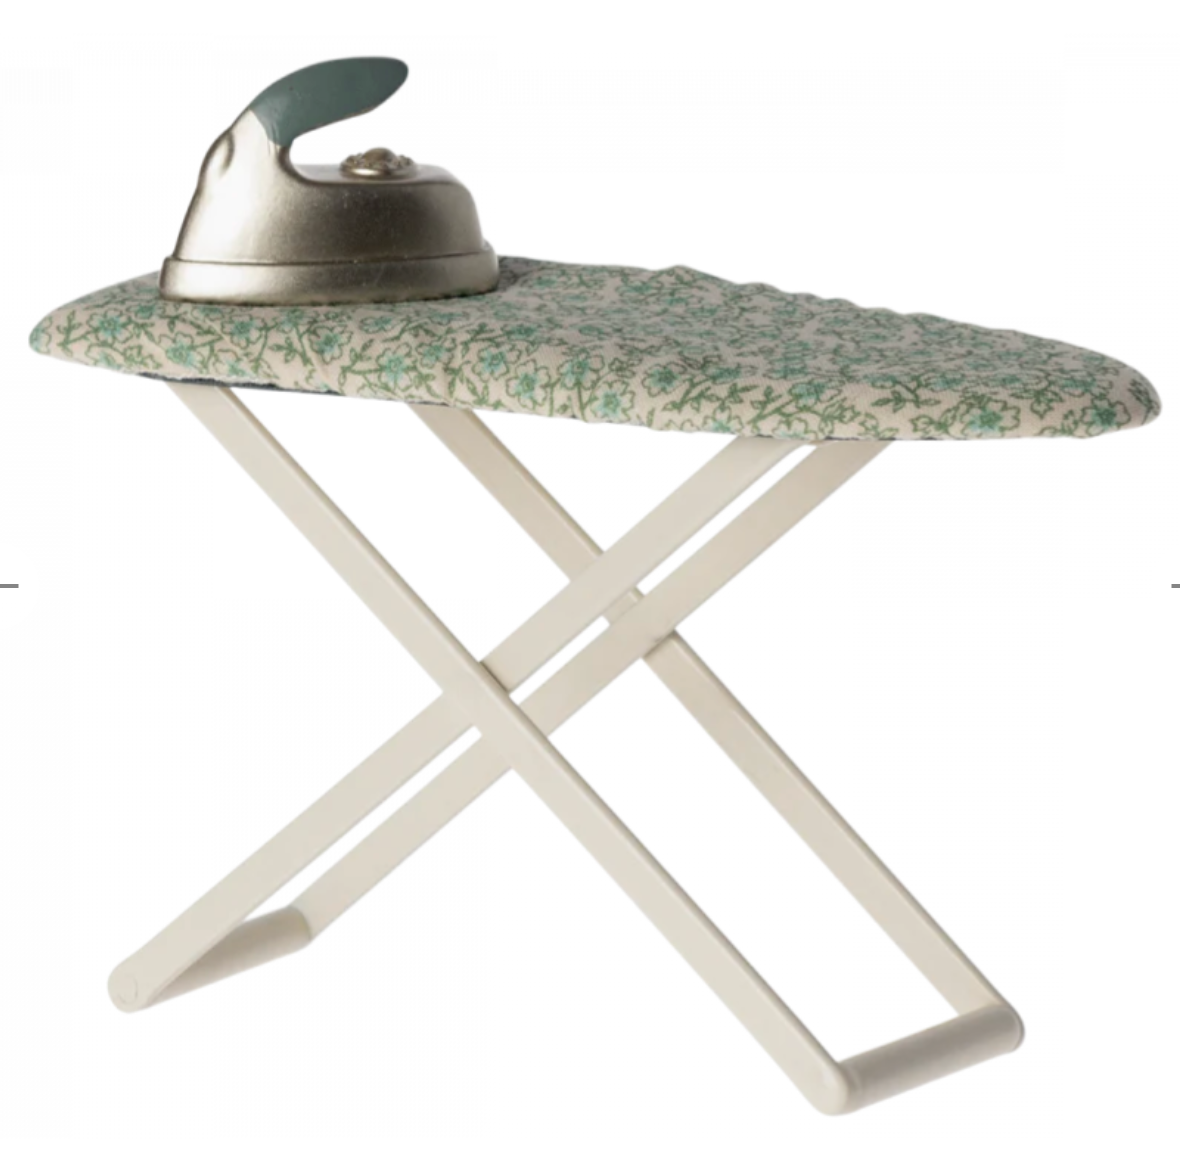 Maileg - Ironing Board & Sweater for Mouse